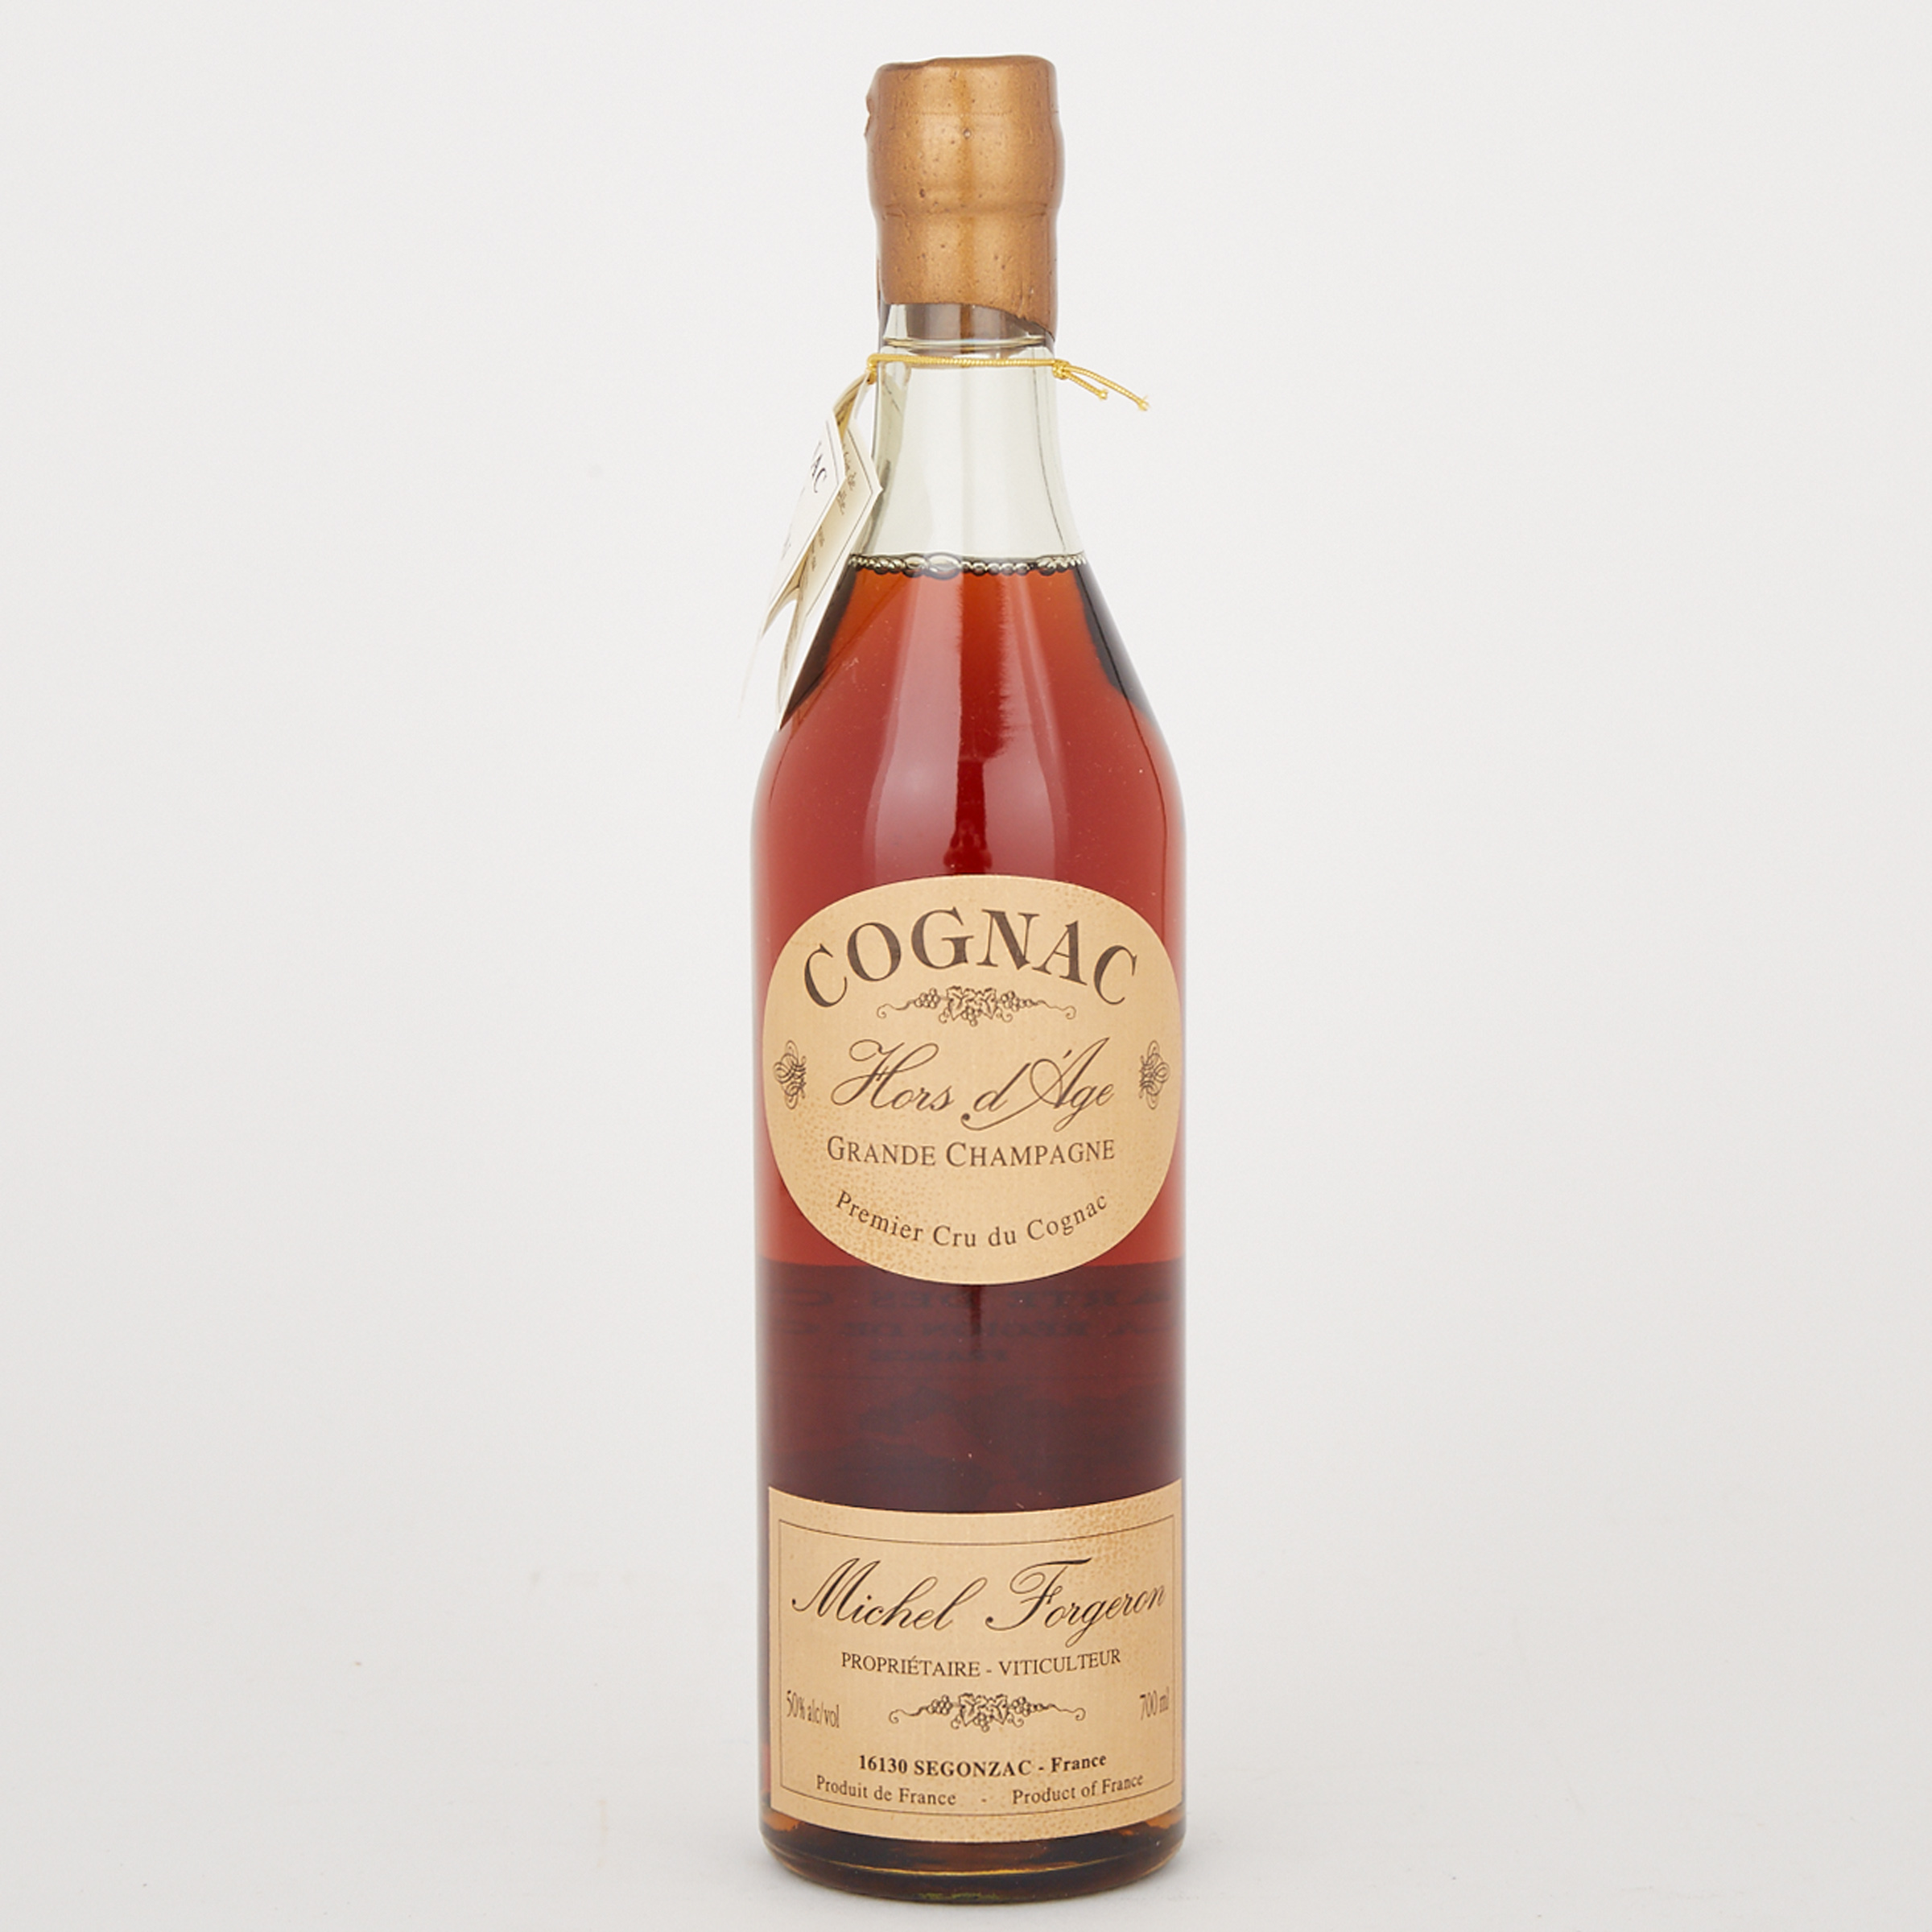 HORS D'AGE GRAND CHAMPAGNE COGNAC 40 YRS. (ONE 700 ML)